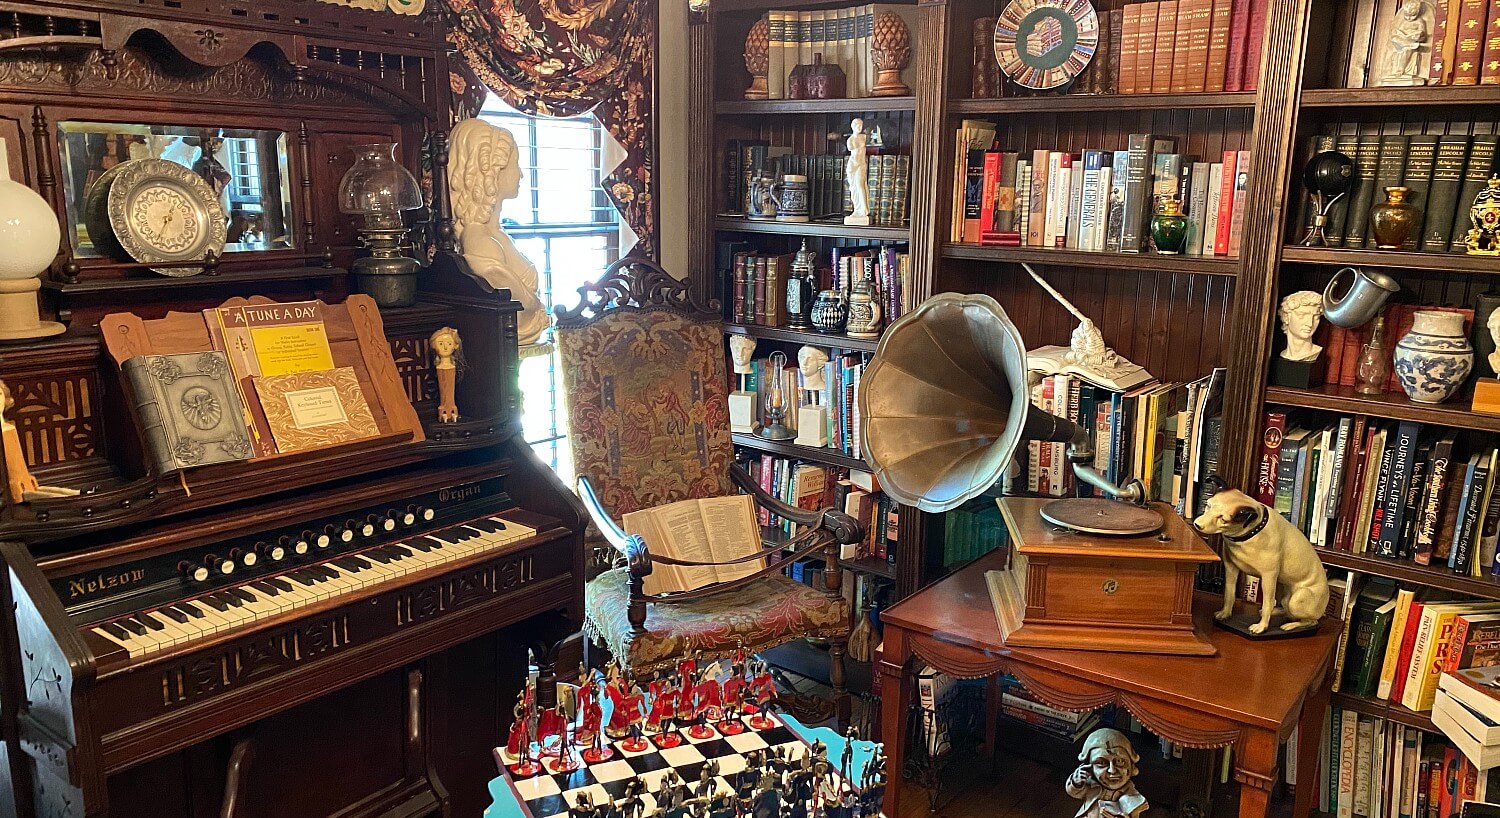 Study of an historic home with large bookshelves and many antiques including an organ and record player